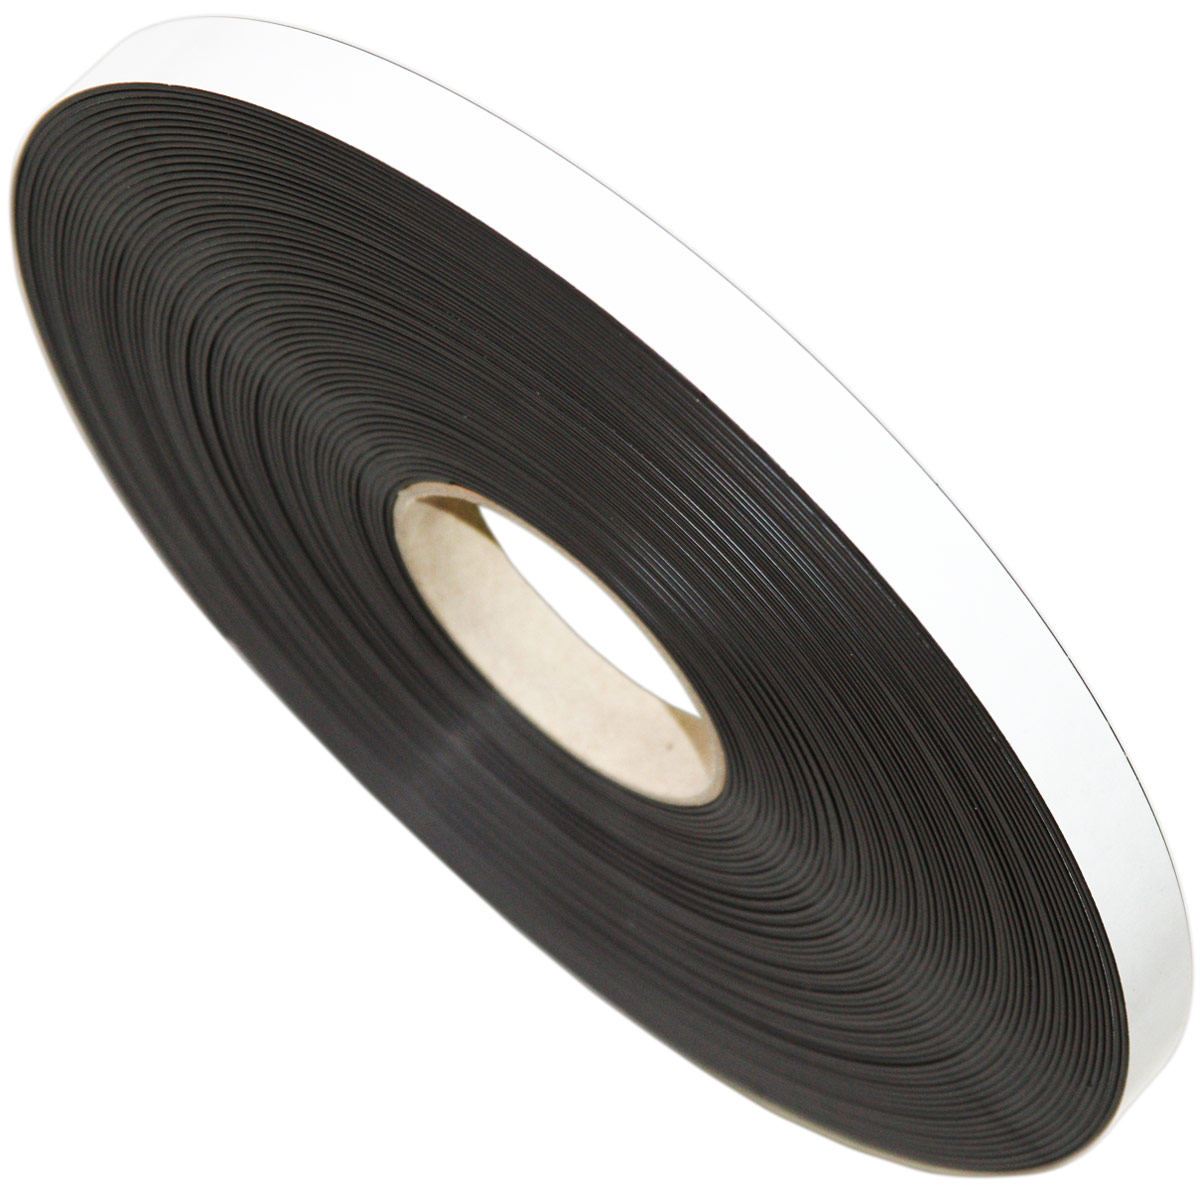 Self-adhesive magnetic tape with Standard glue